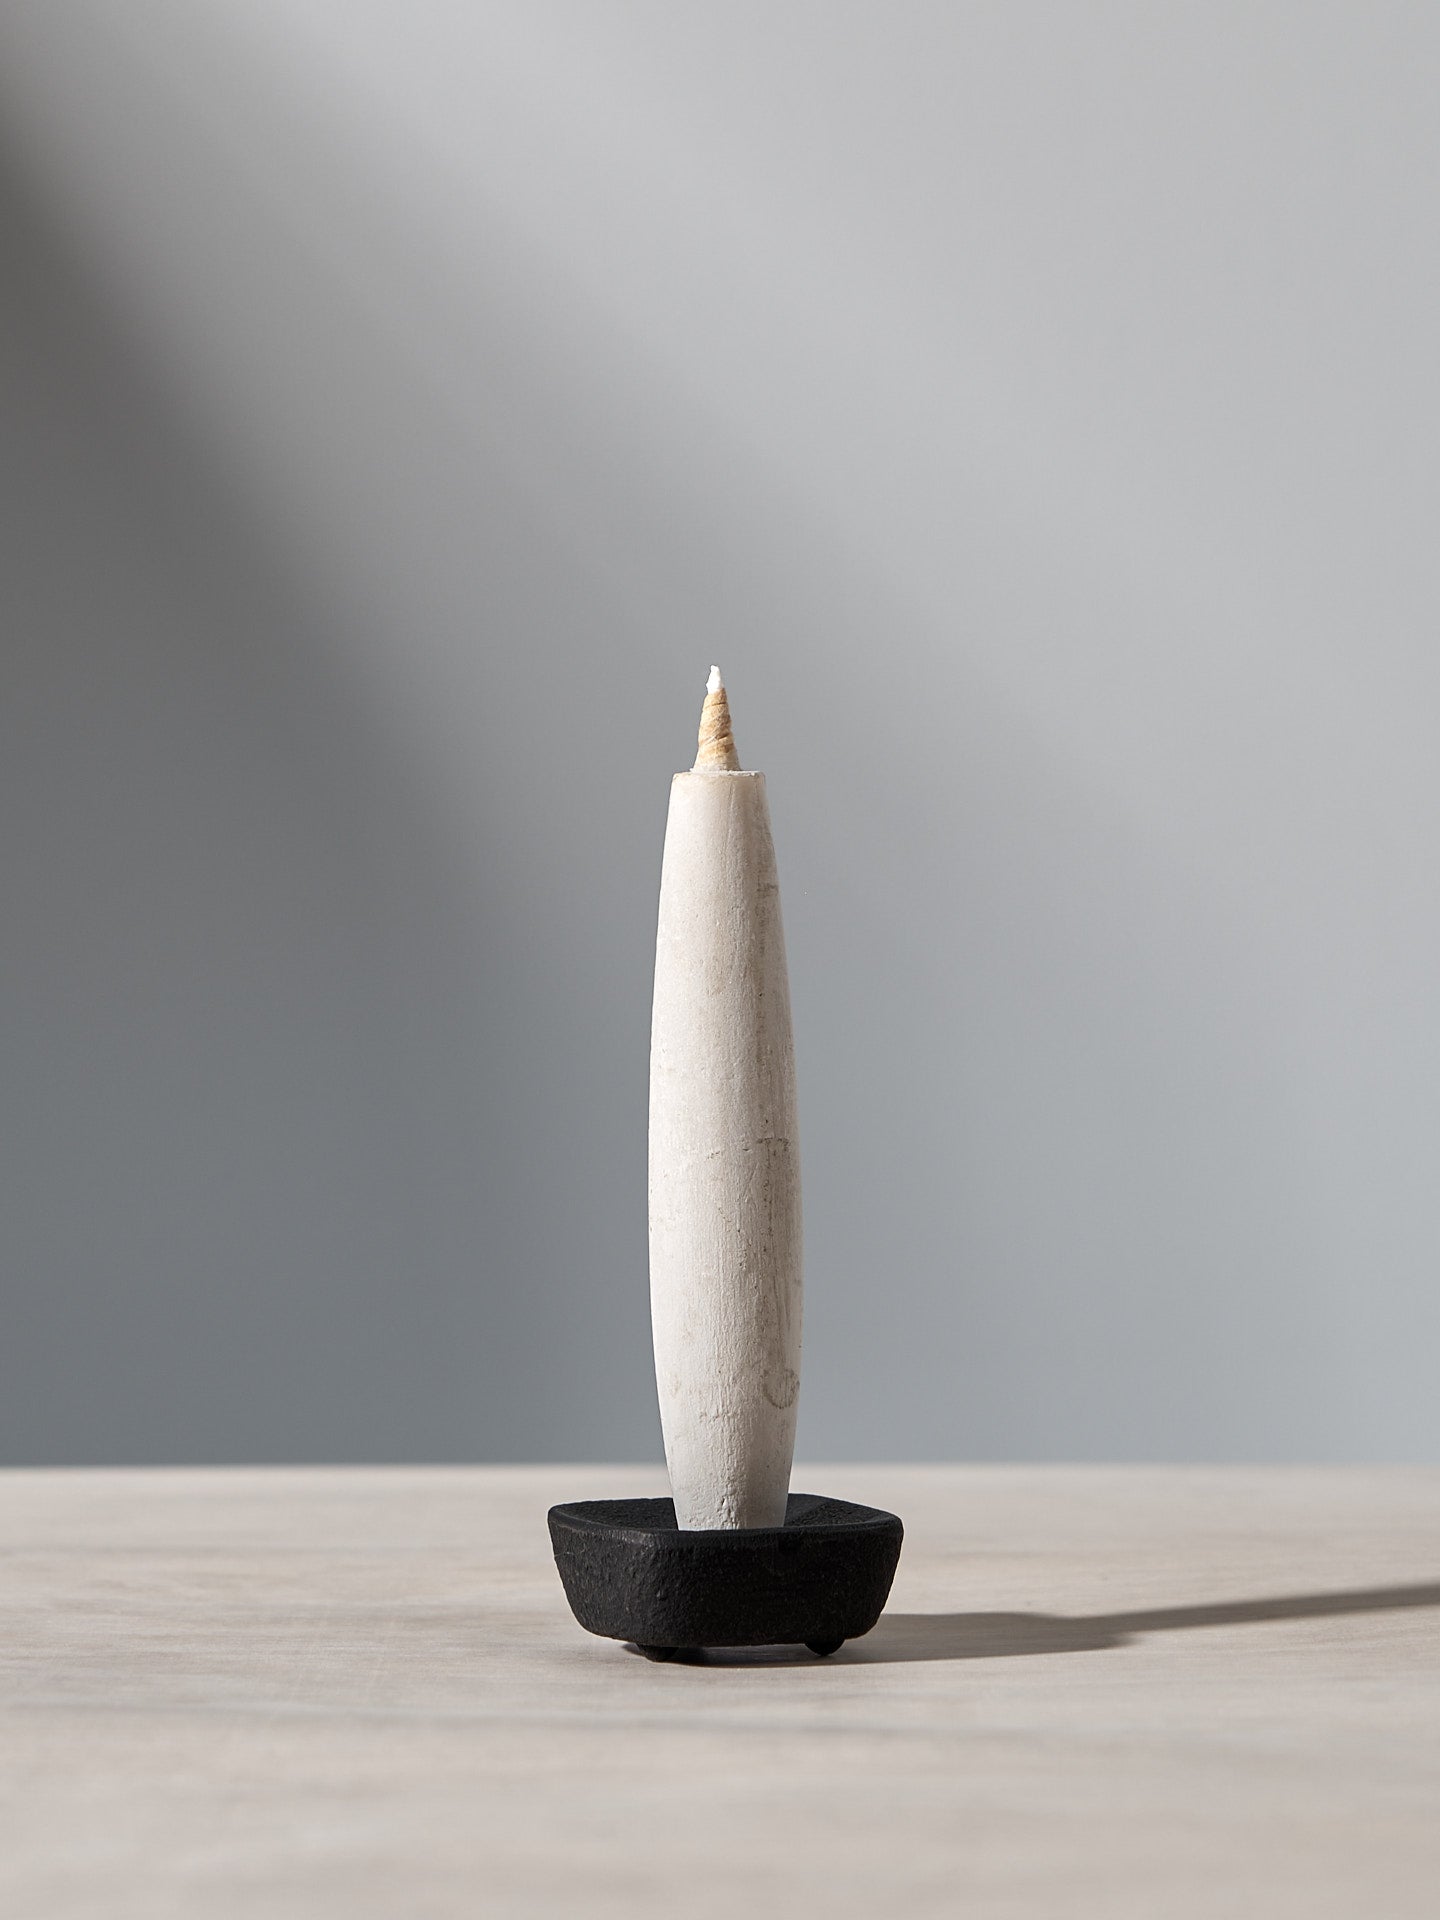 A TOHAKU candle sitting on top of a wooden table.